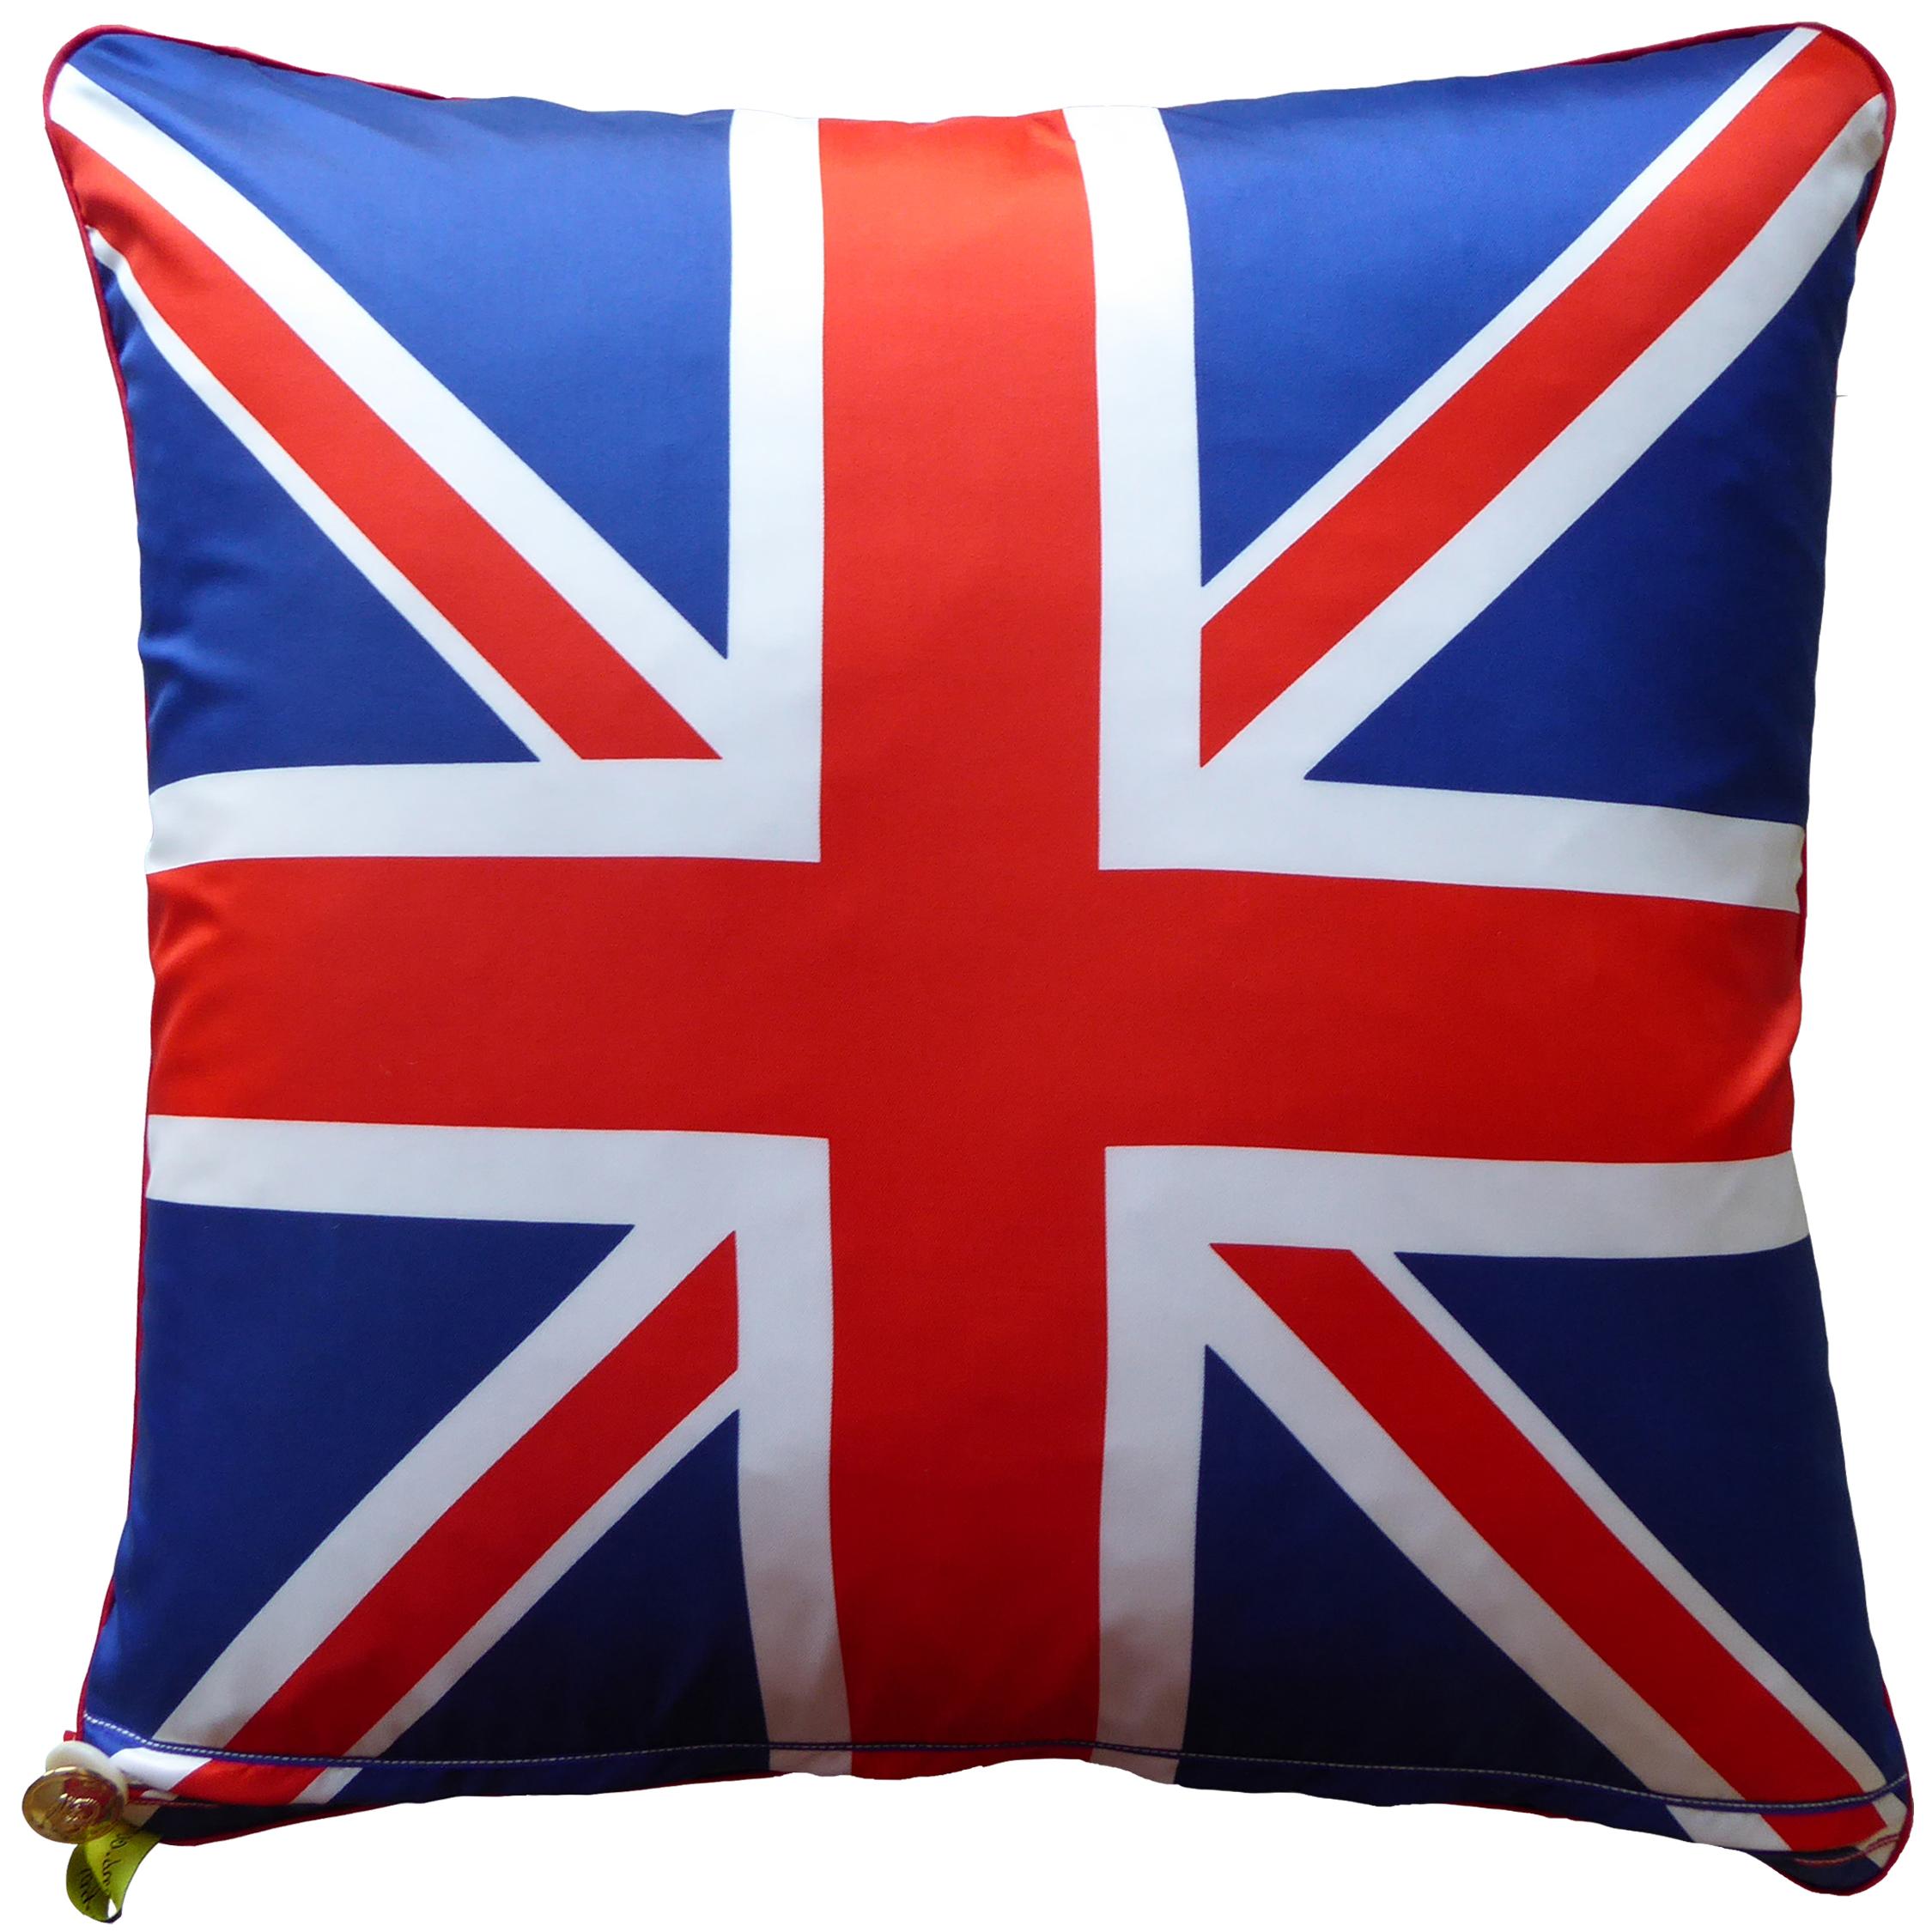 Vintage cushions, 'Piccadilly Circus',
circa 1970 and 1980
British bespoke luxury cushion created using original vintage fabrics featuring complimentary contrasting sides; the front is a souvenir of iconic tourist sites in London, the reverse a